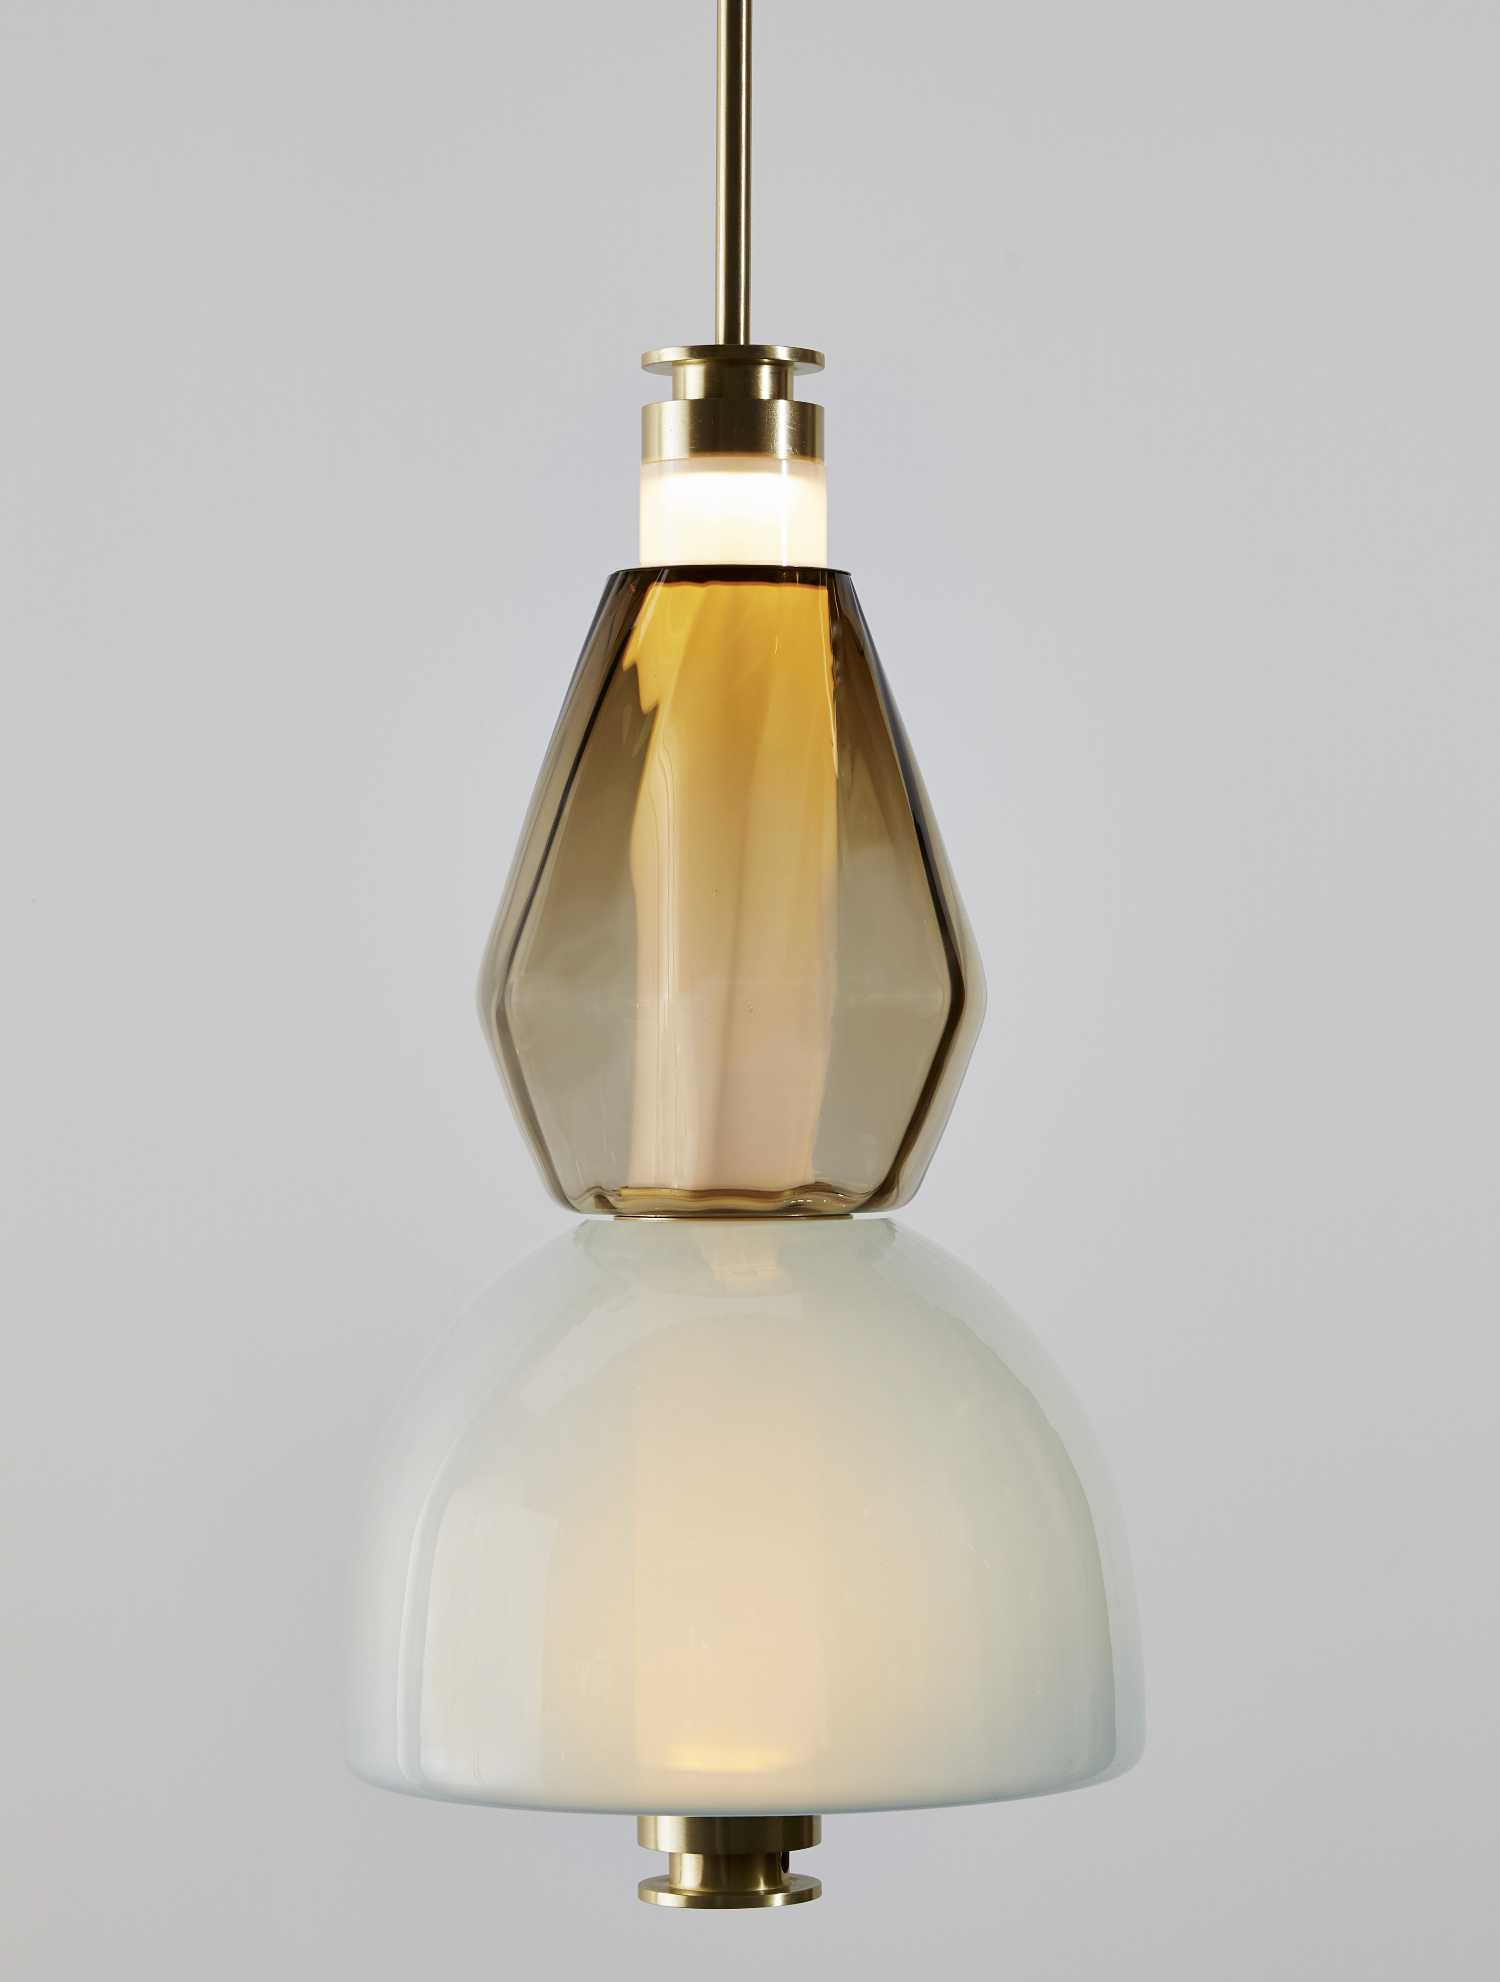 Light Fixtures Online Illuminate Your Home with Stylish and Affordable Lighting Options